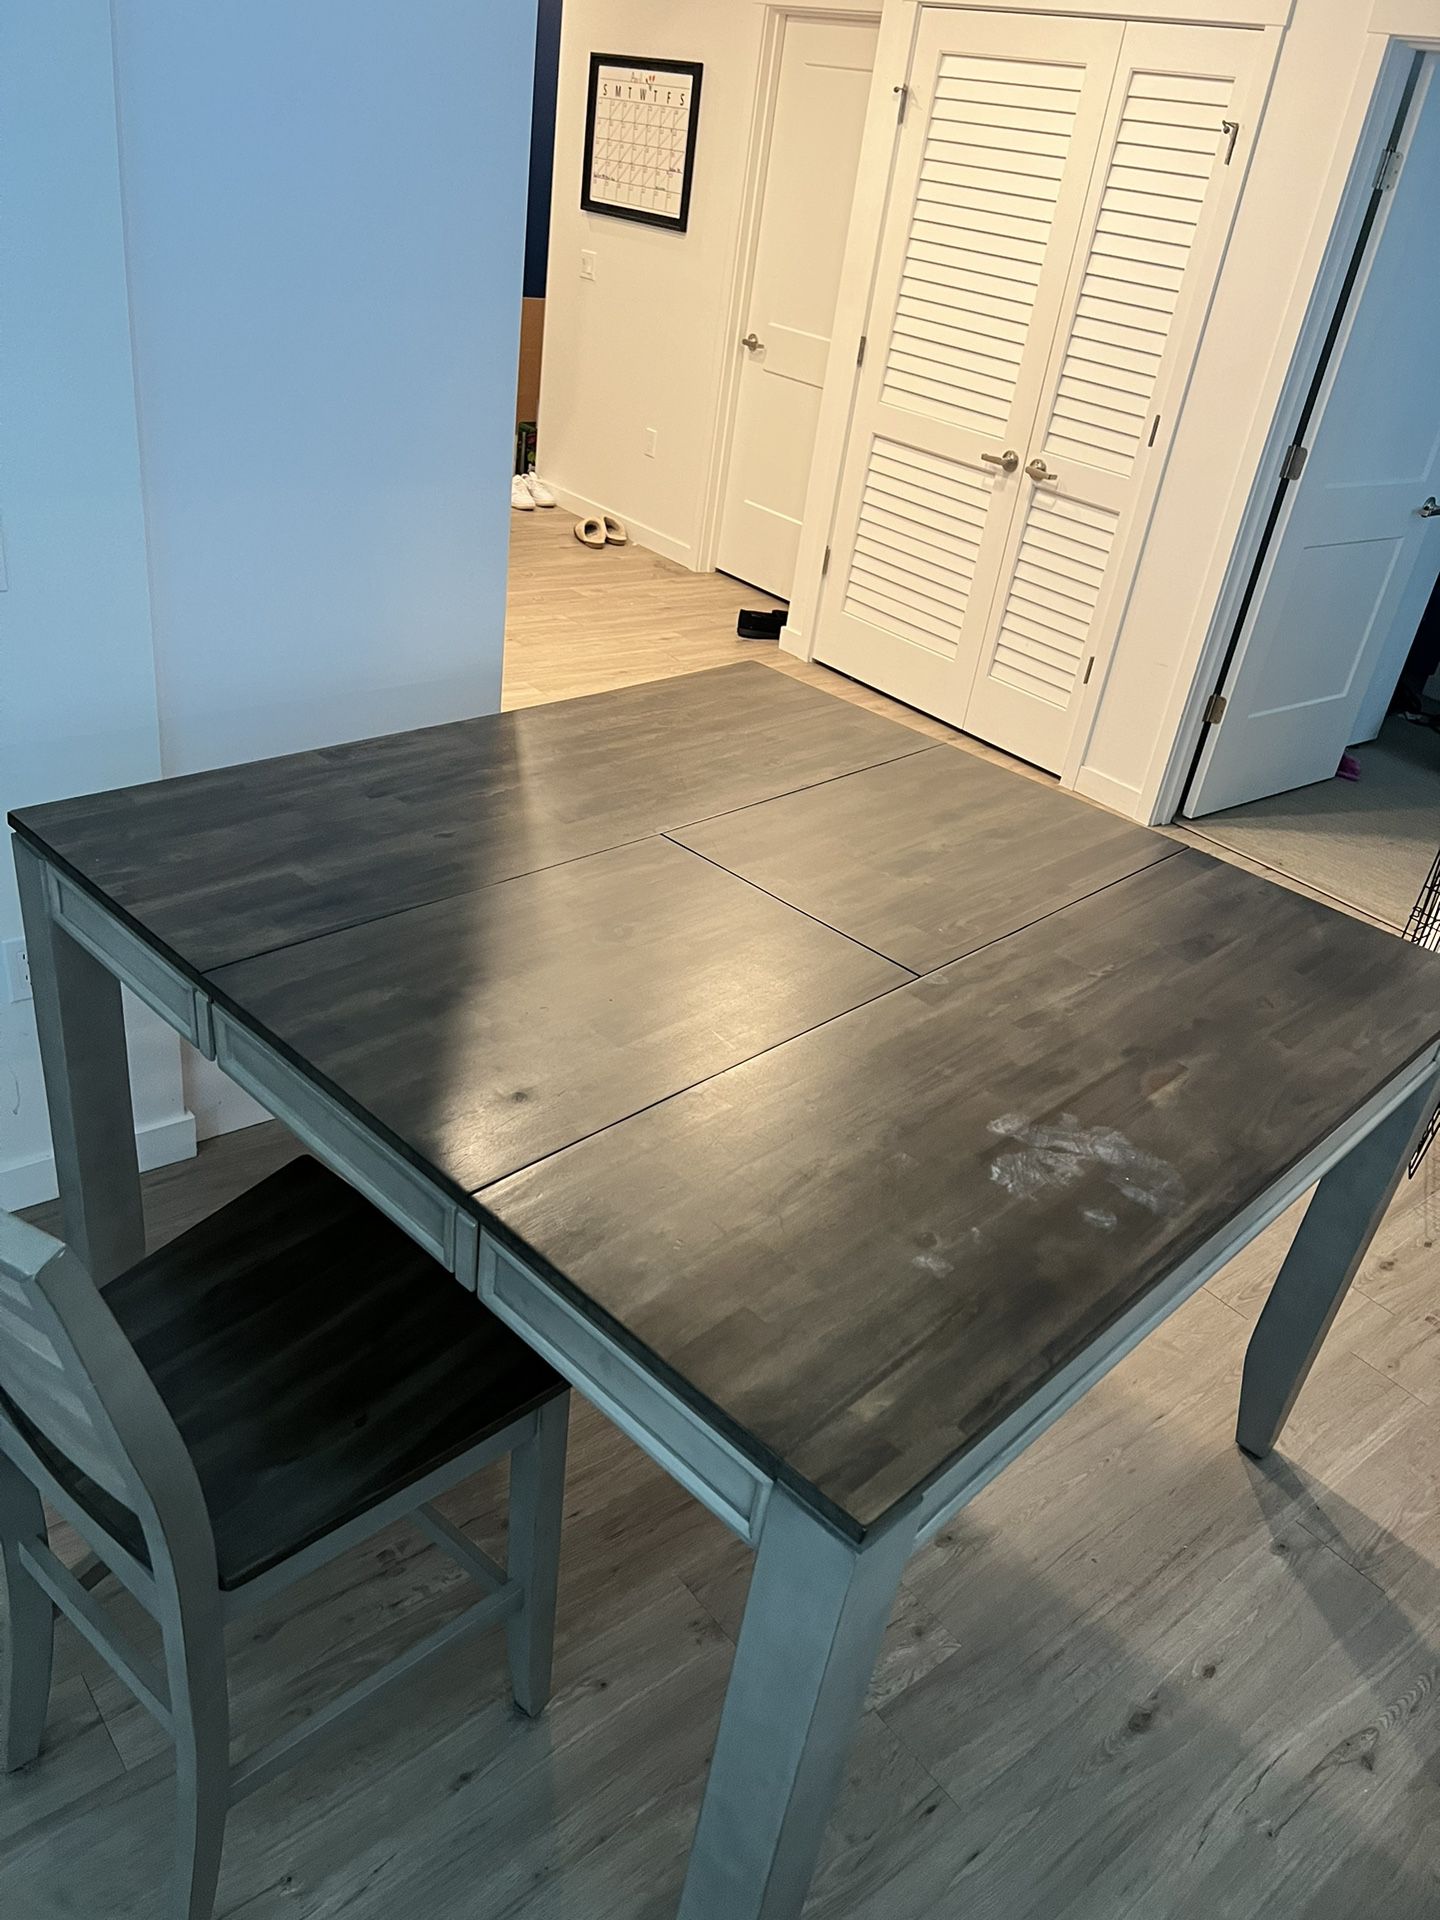 Dining Room Table Built In Leaf